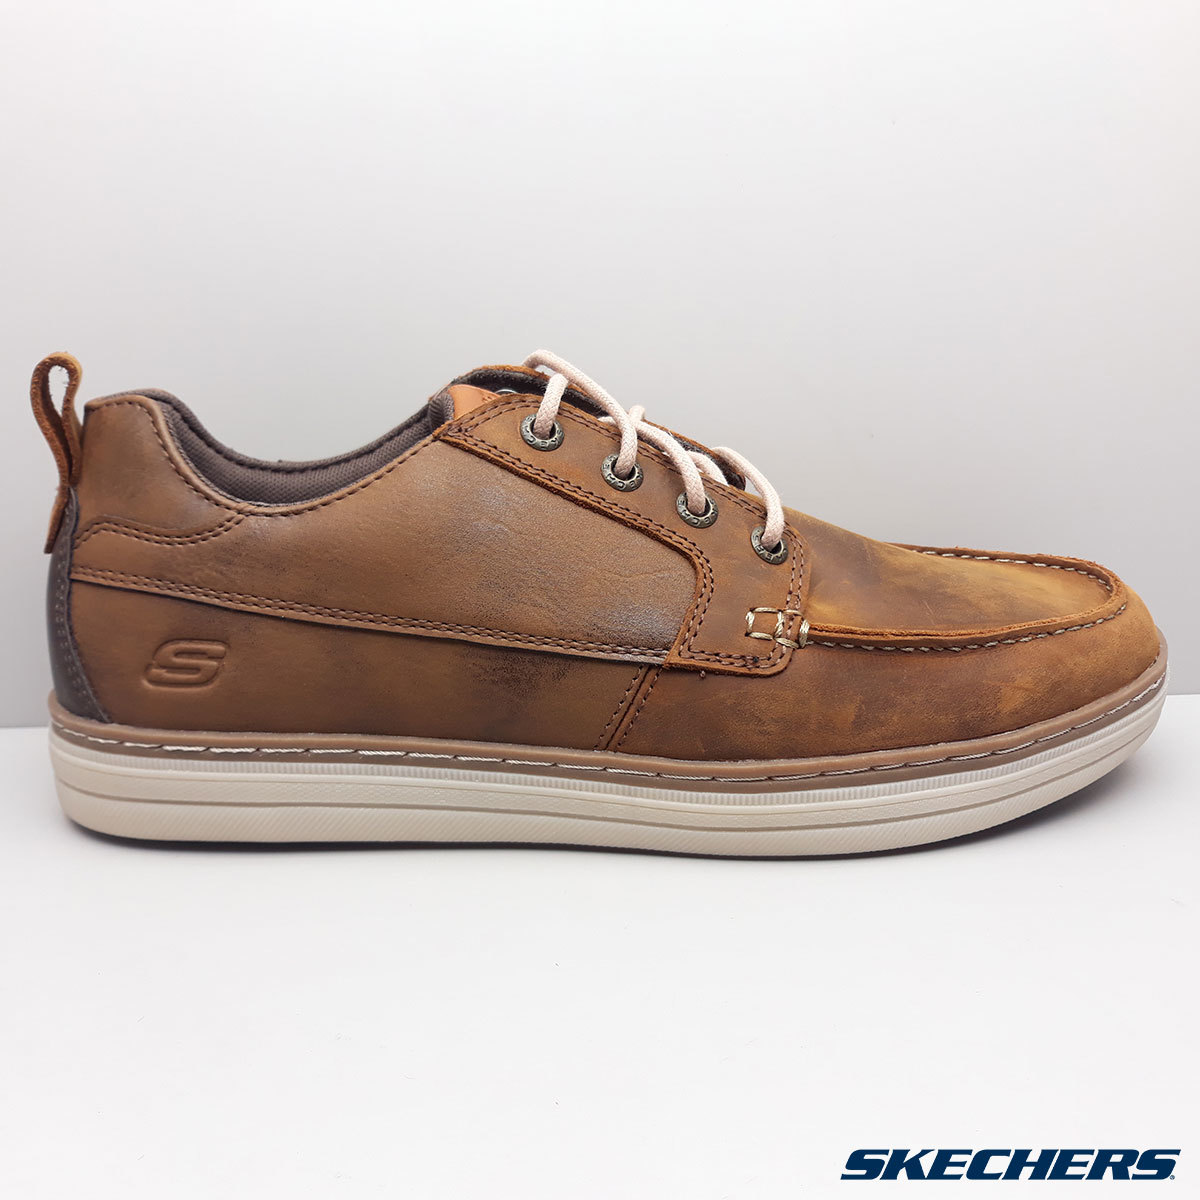 skechers leather shoes